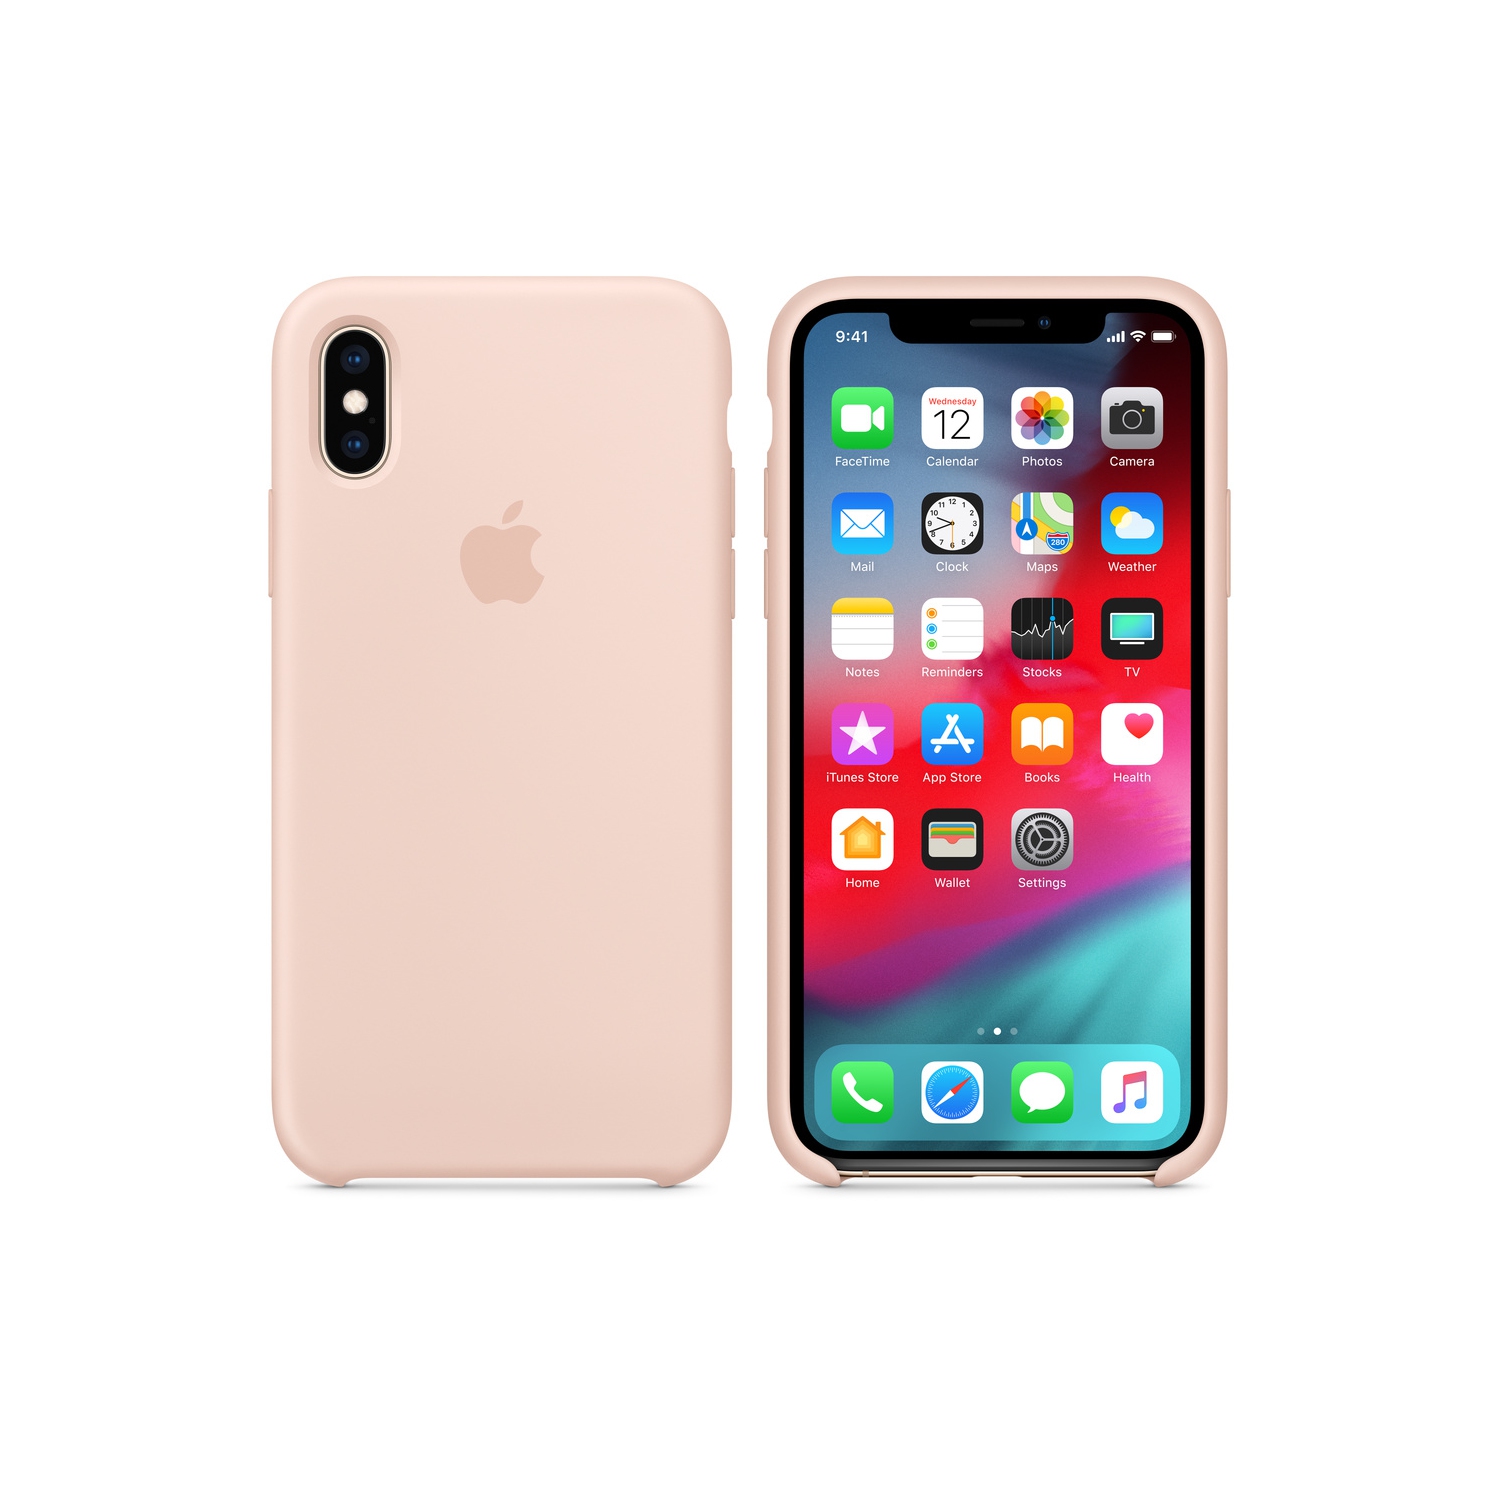 Apple Silicone Case (for iPhone X and XS) - Pink Sand - Open Box (10/10 condition)